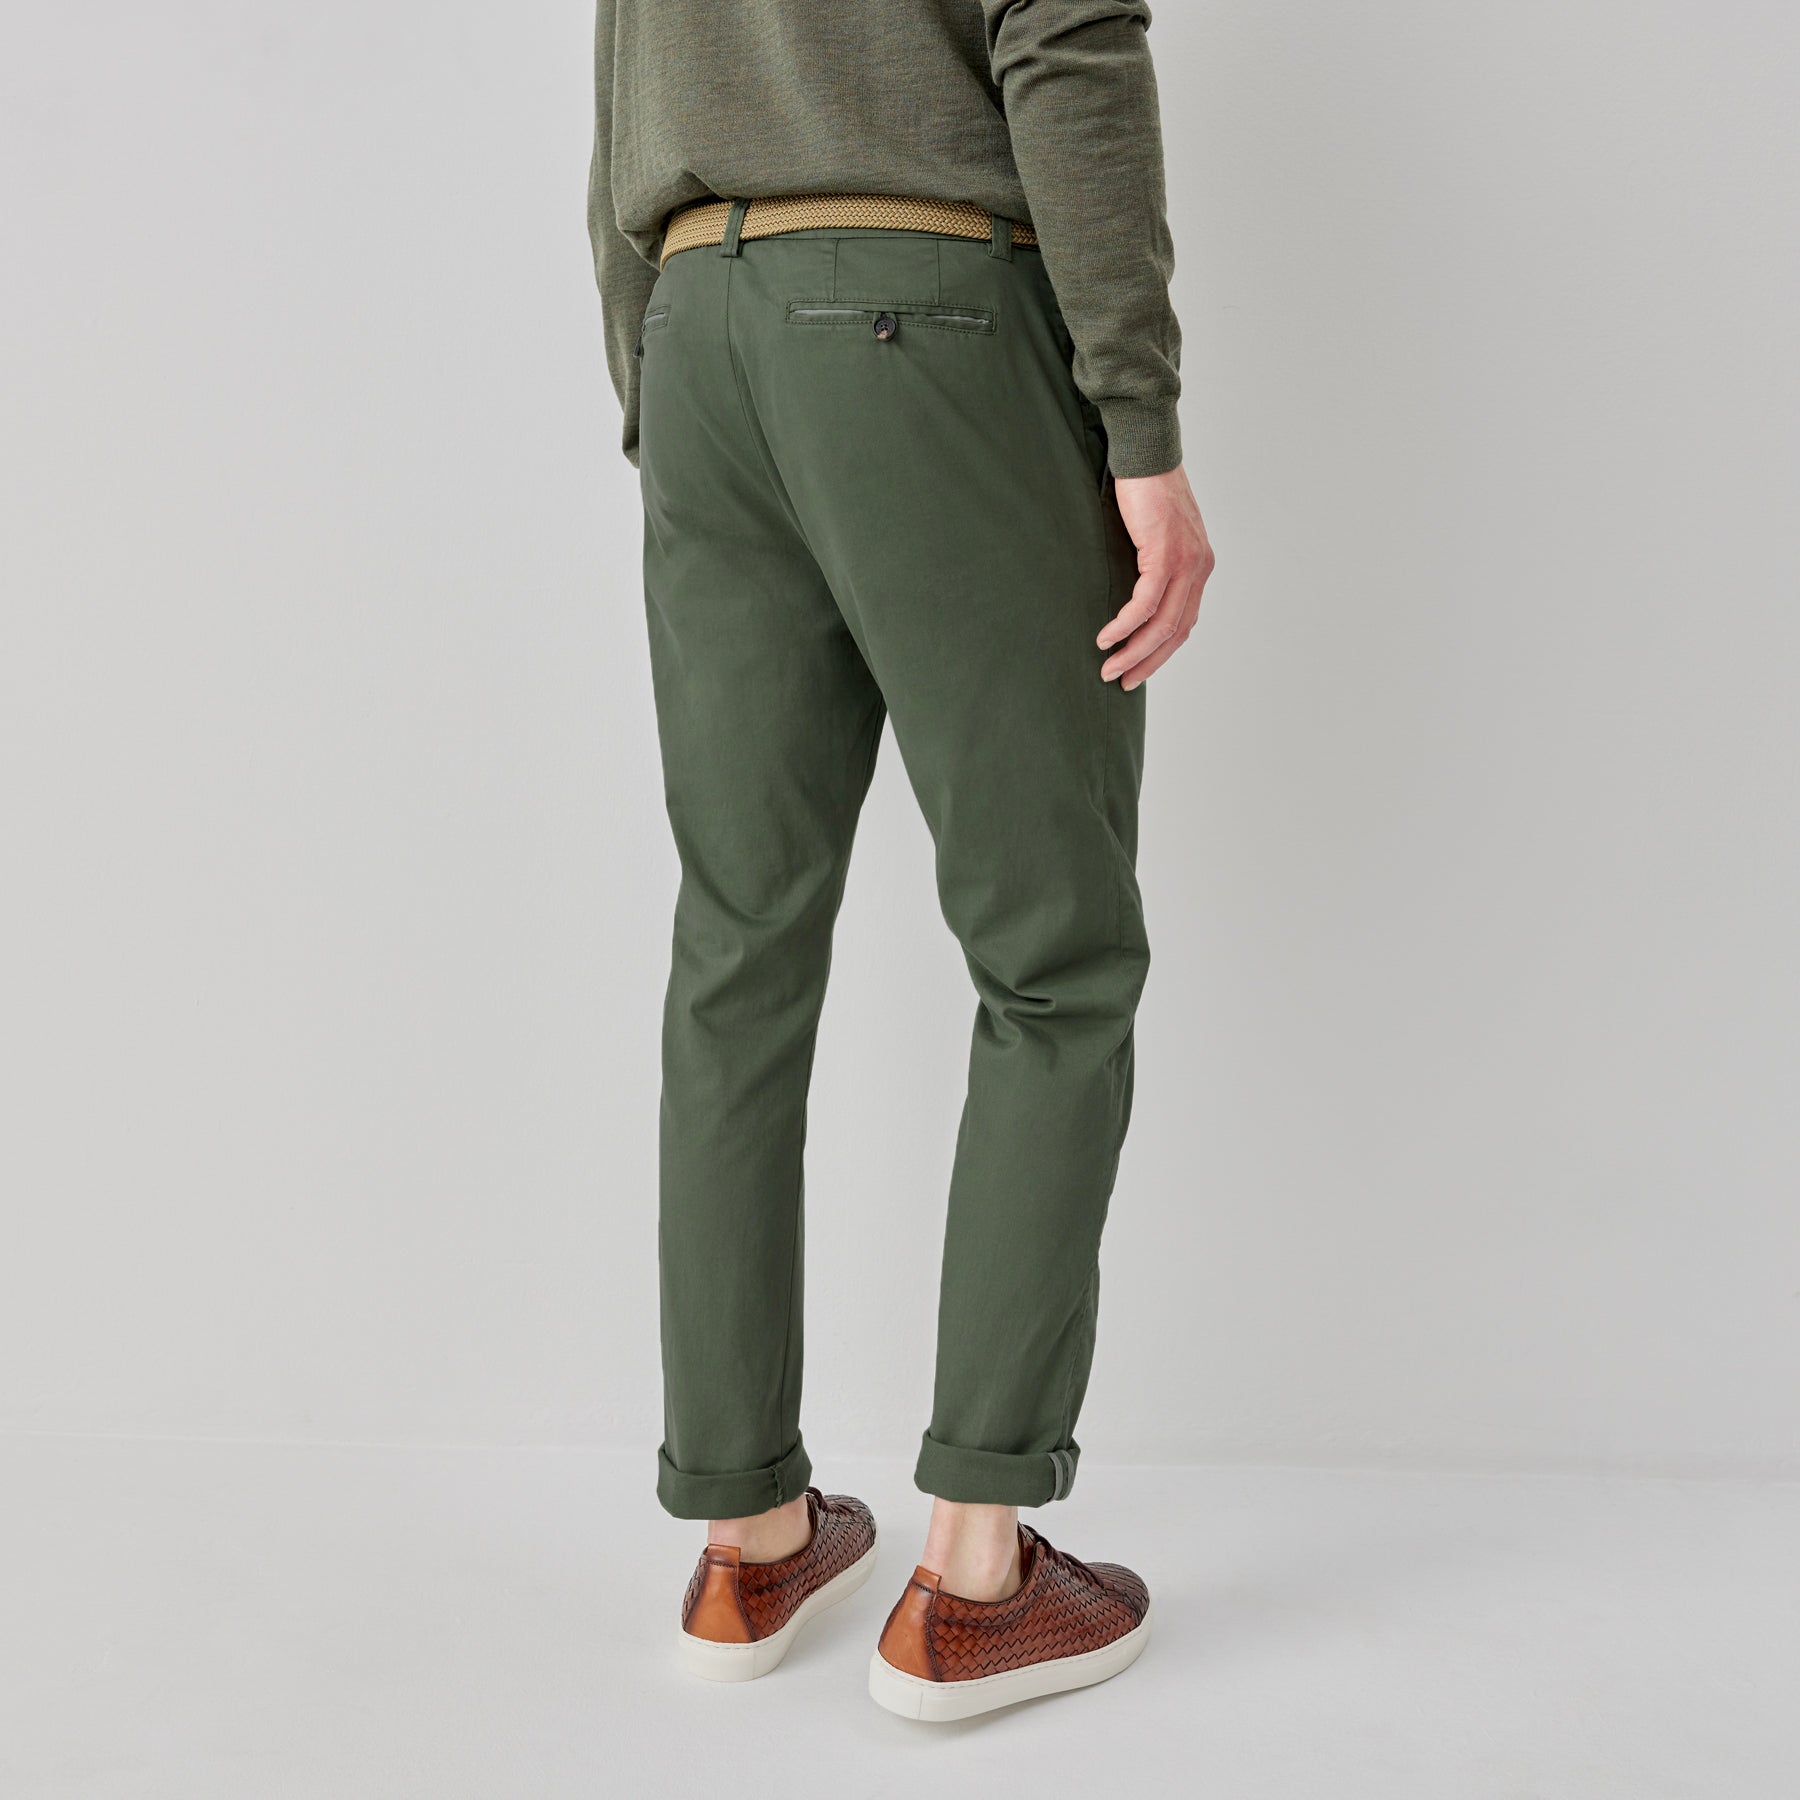 Besterios Olive Cotton Chinos, Men's Chinos